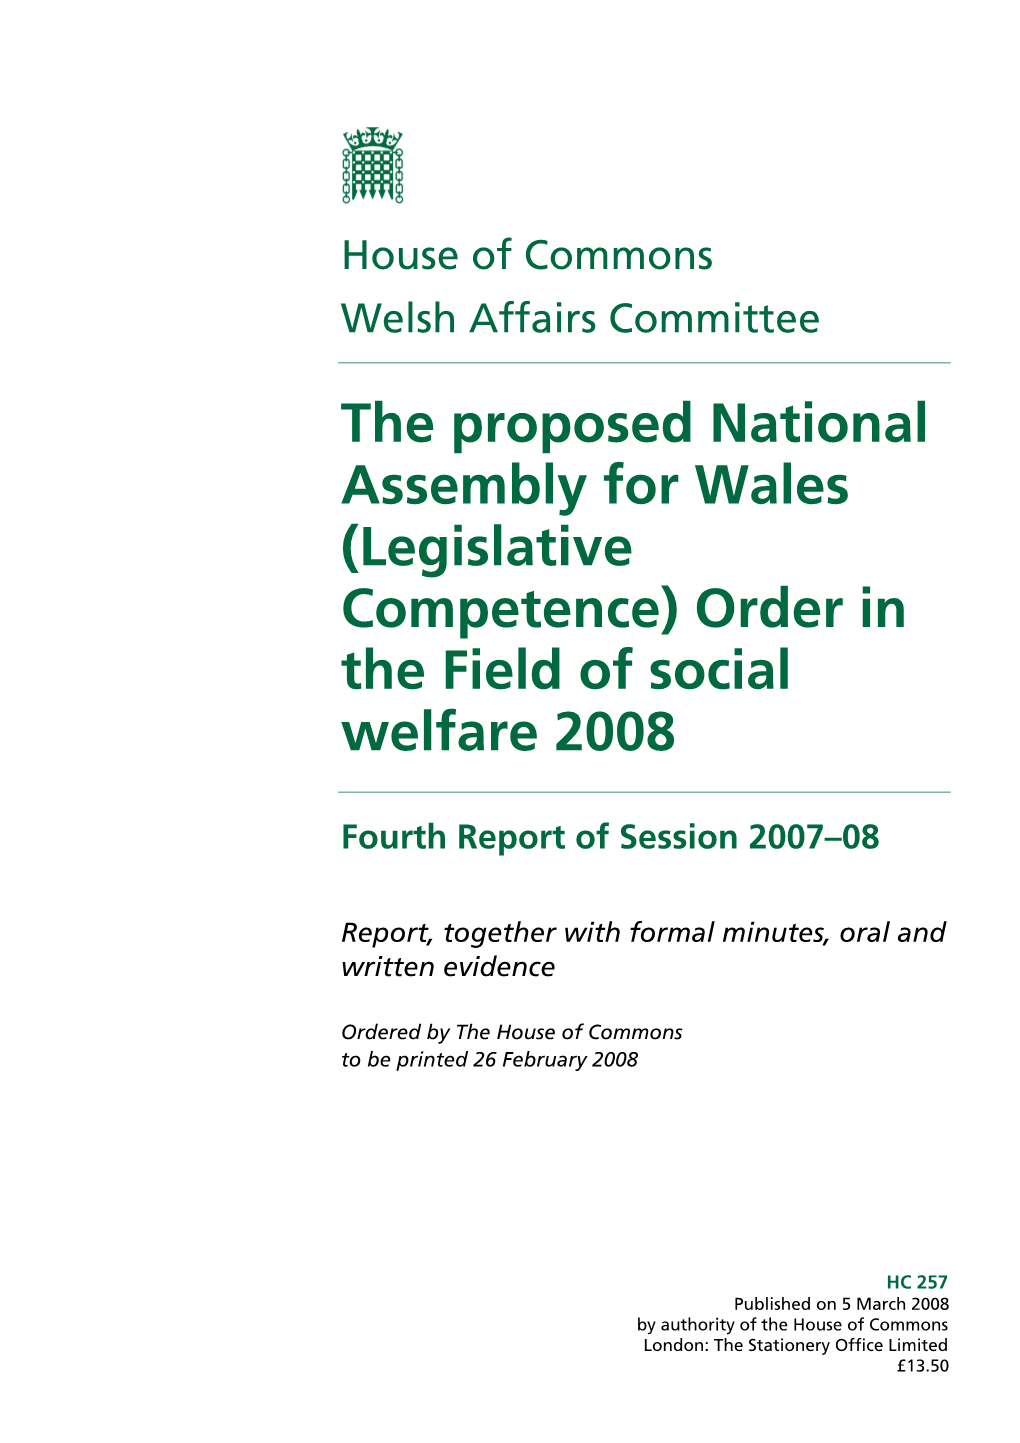 The Proposed National Assembly for Wales (Legislative Competence) Order in the Field of Social Welfare 2008